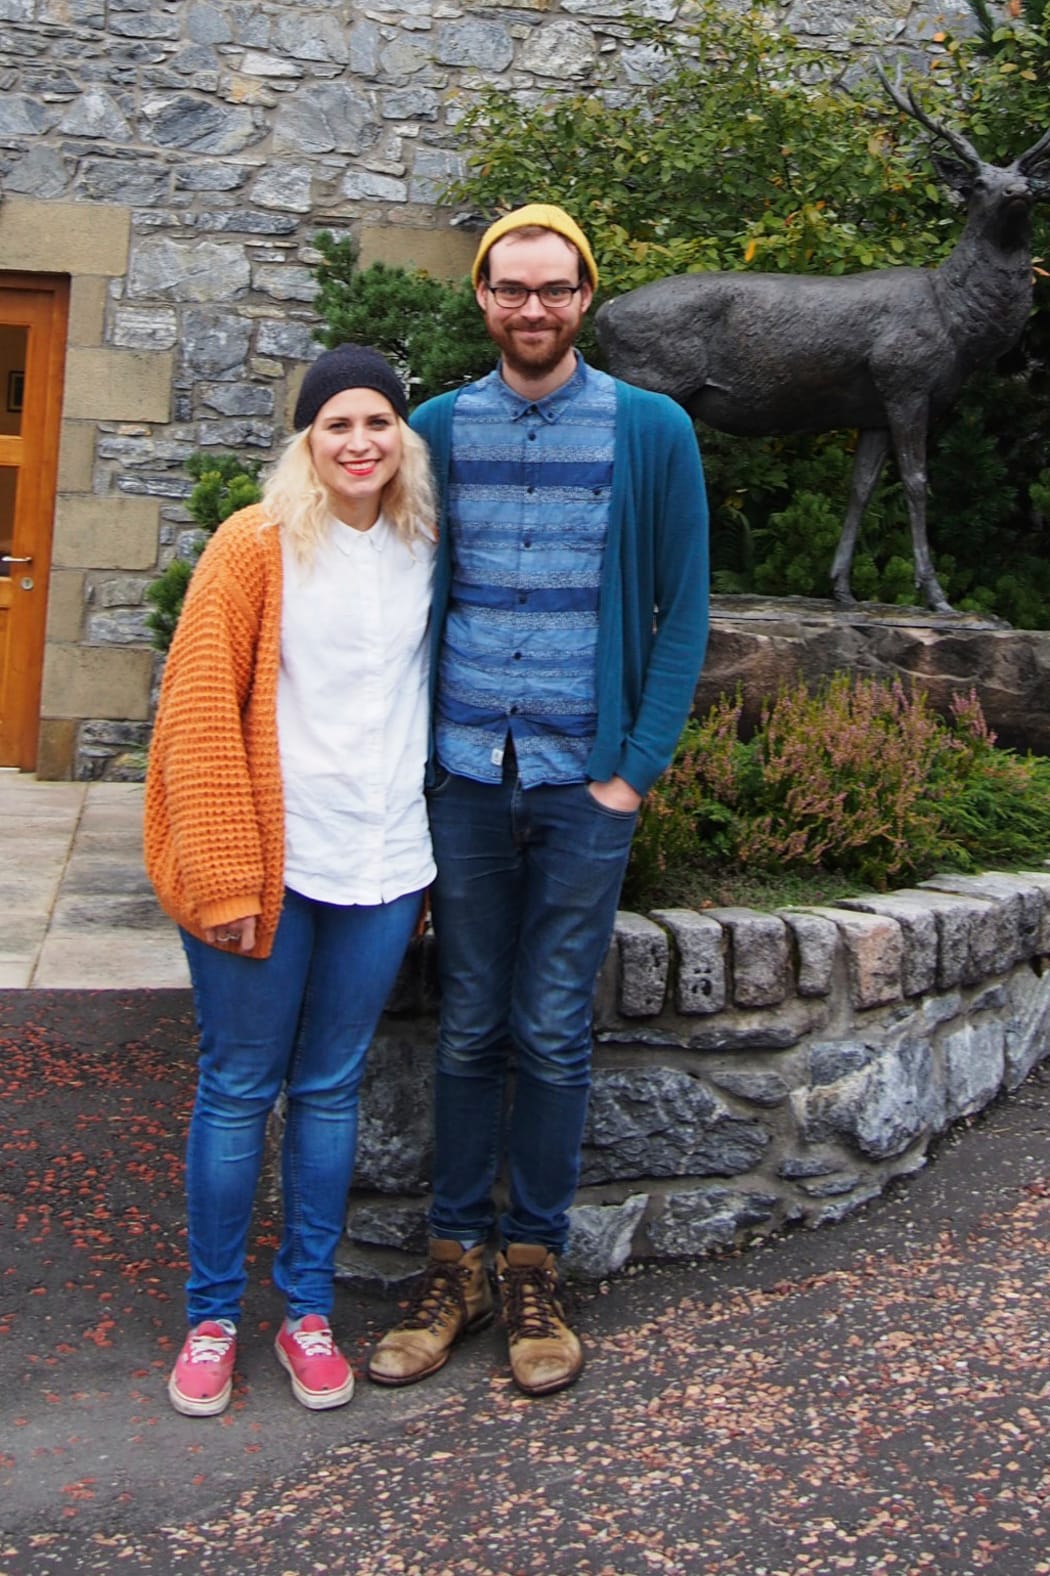 Jared Edwards with girlfriend Kirsty outside the Glenfiddich whisky distillery in Scotland.